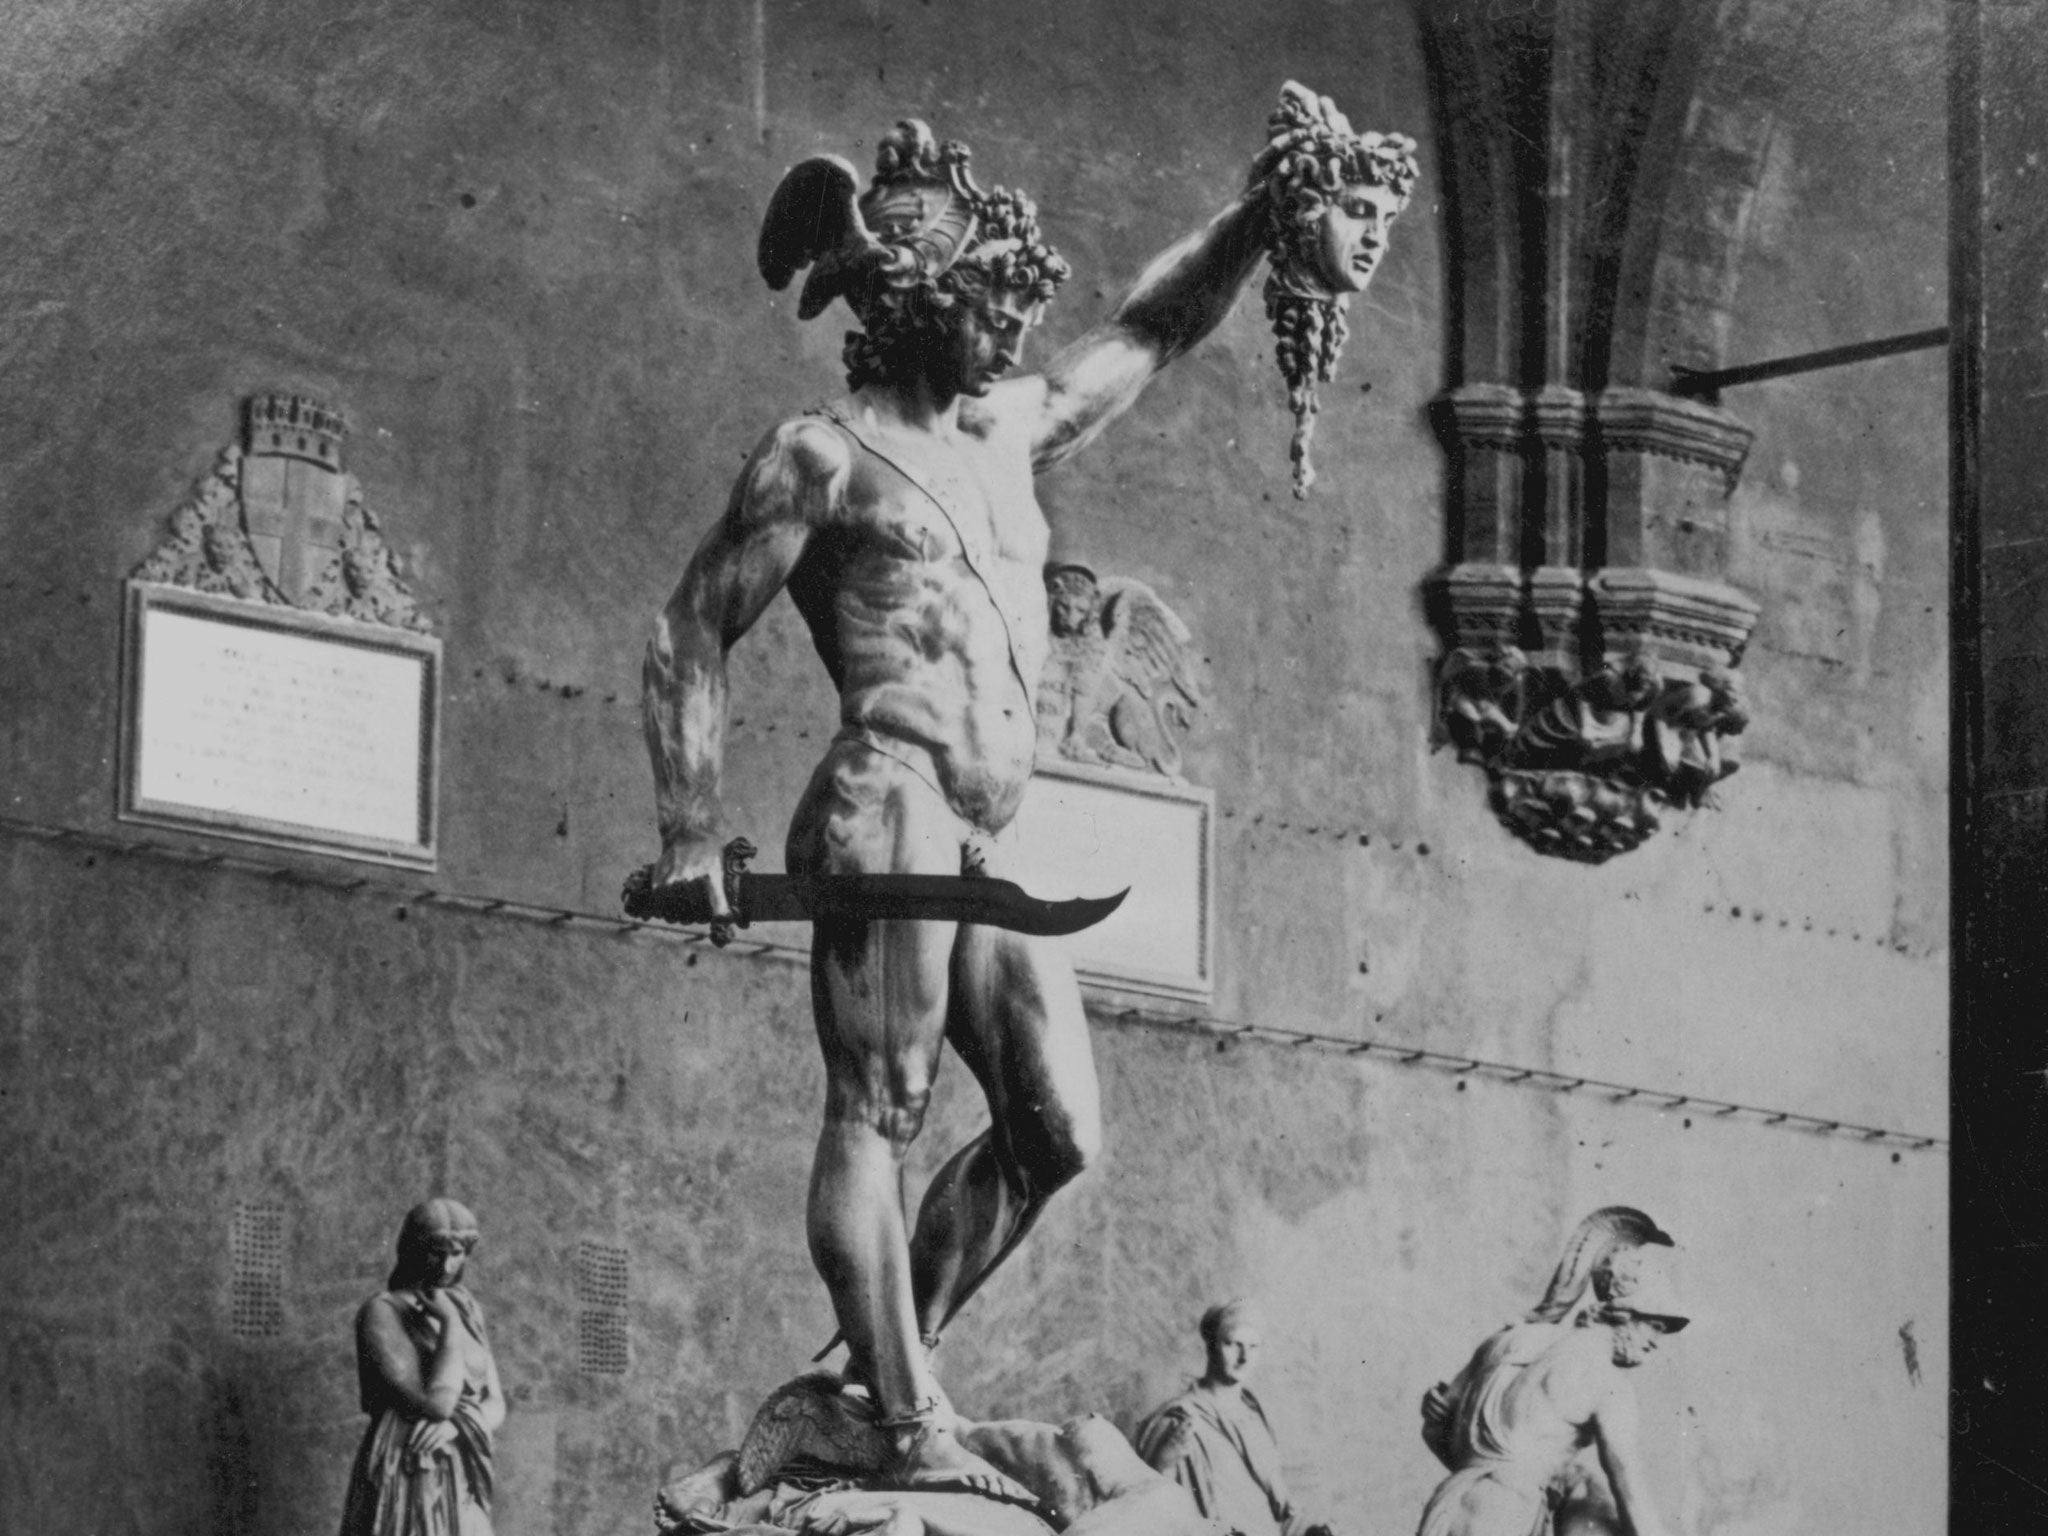 Perseus holding the severed head of the Gorgon Medusa